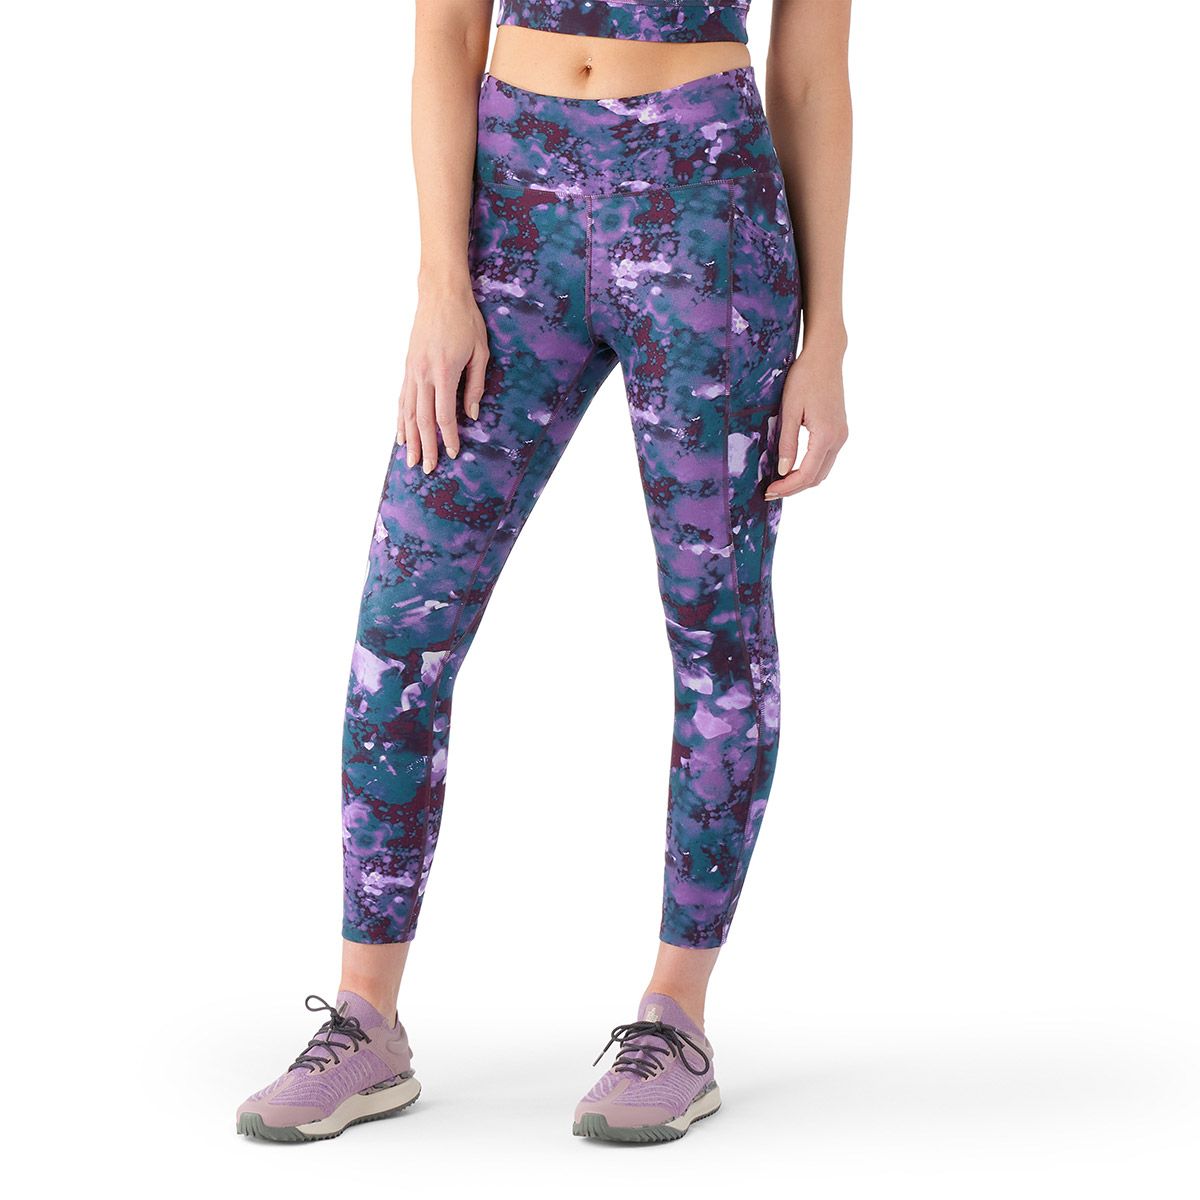 Spyder Leggings or base layer Colour purple, youth 14/16- L or Women's S